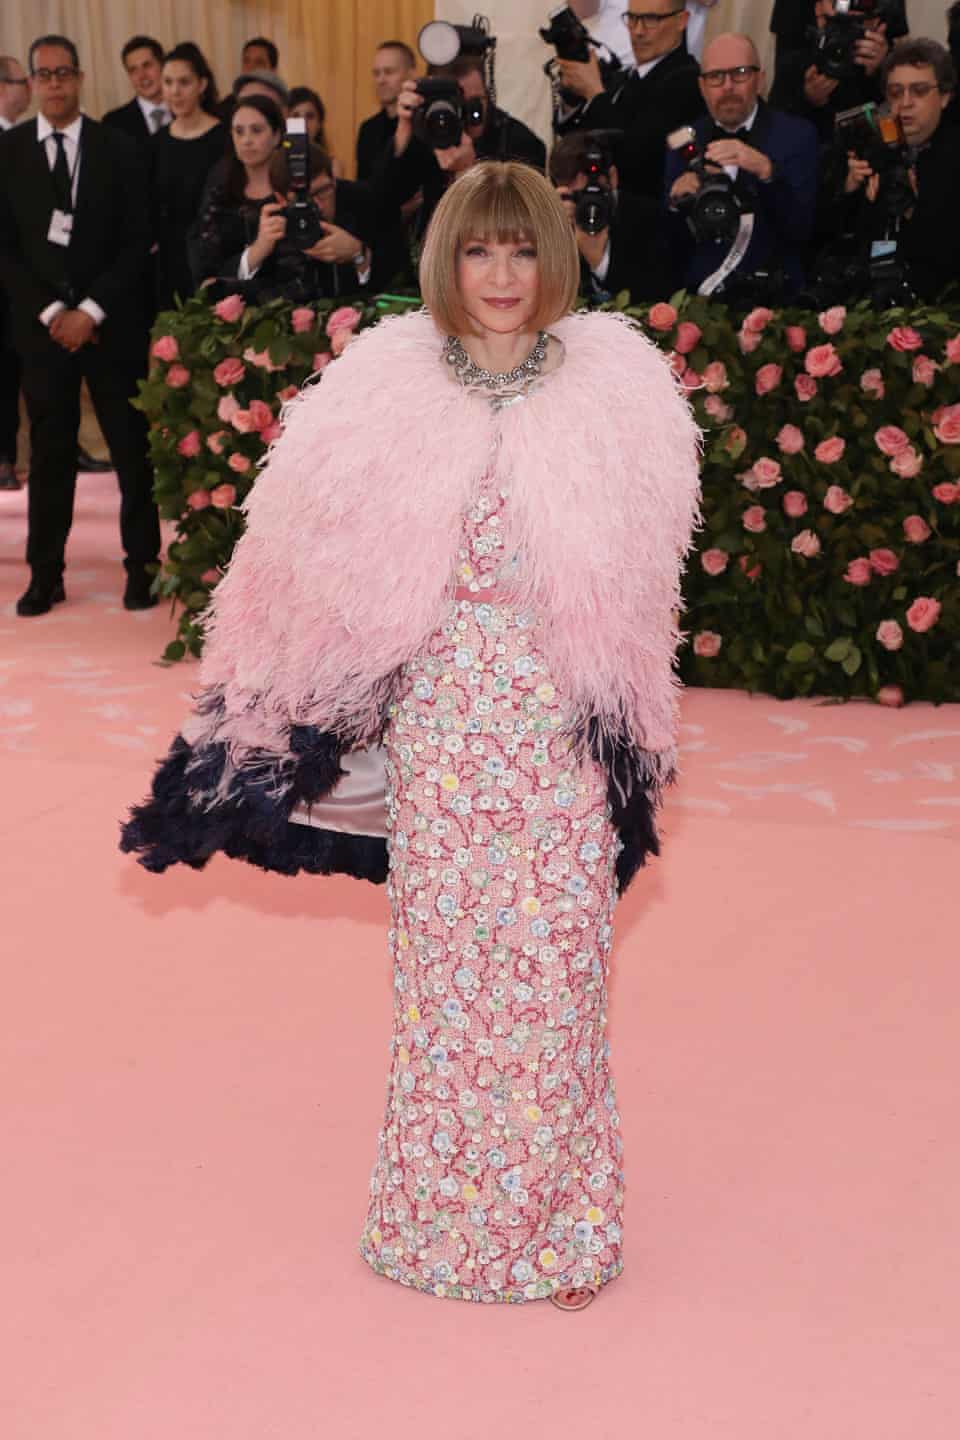 Anna Wintour at the 2019 Met Gala Red Carpet wearing Chanel